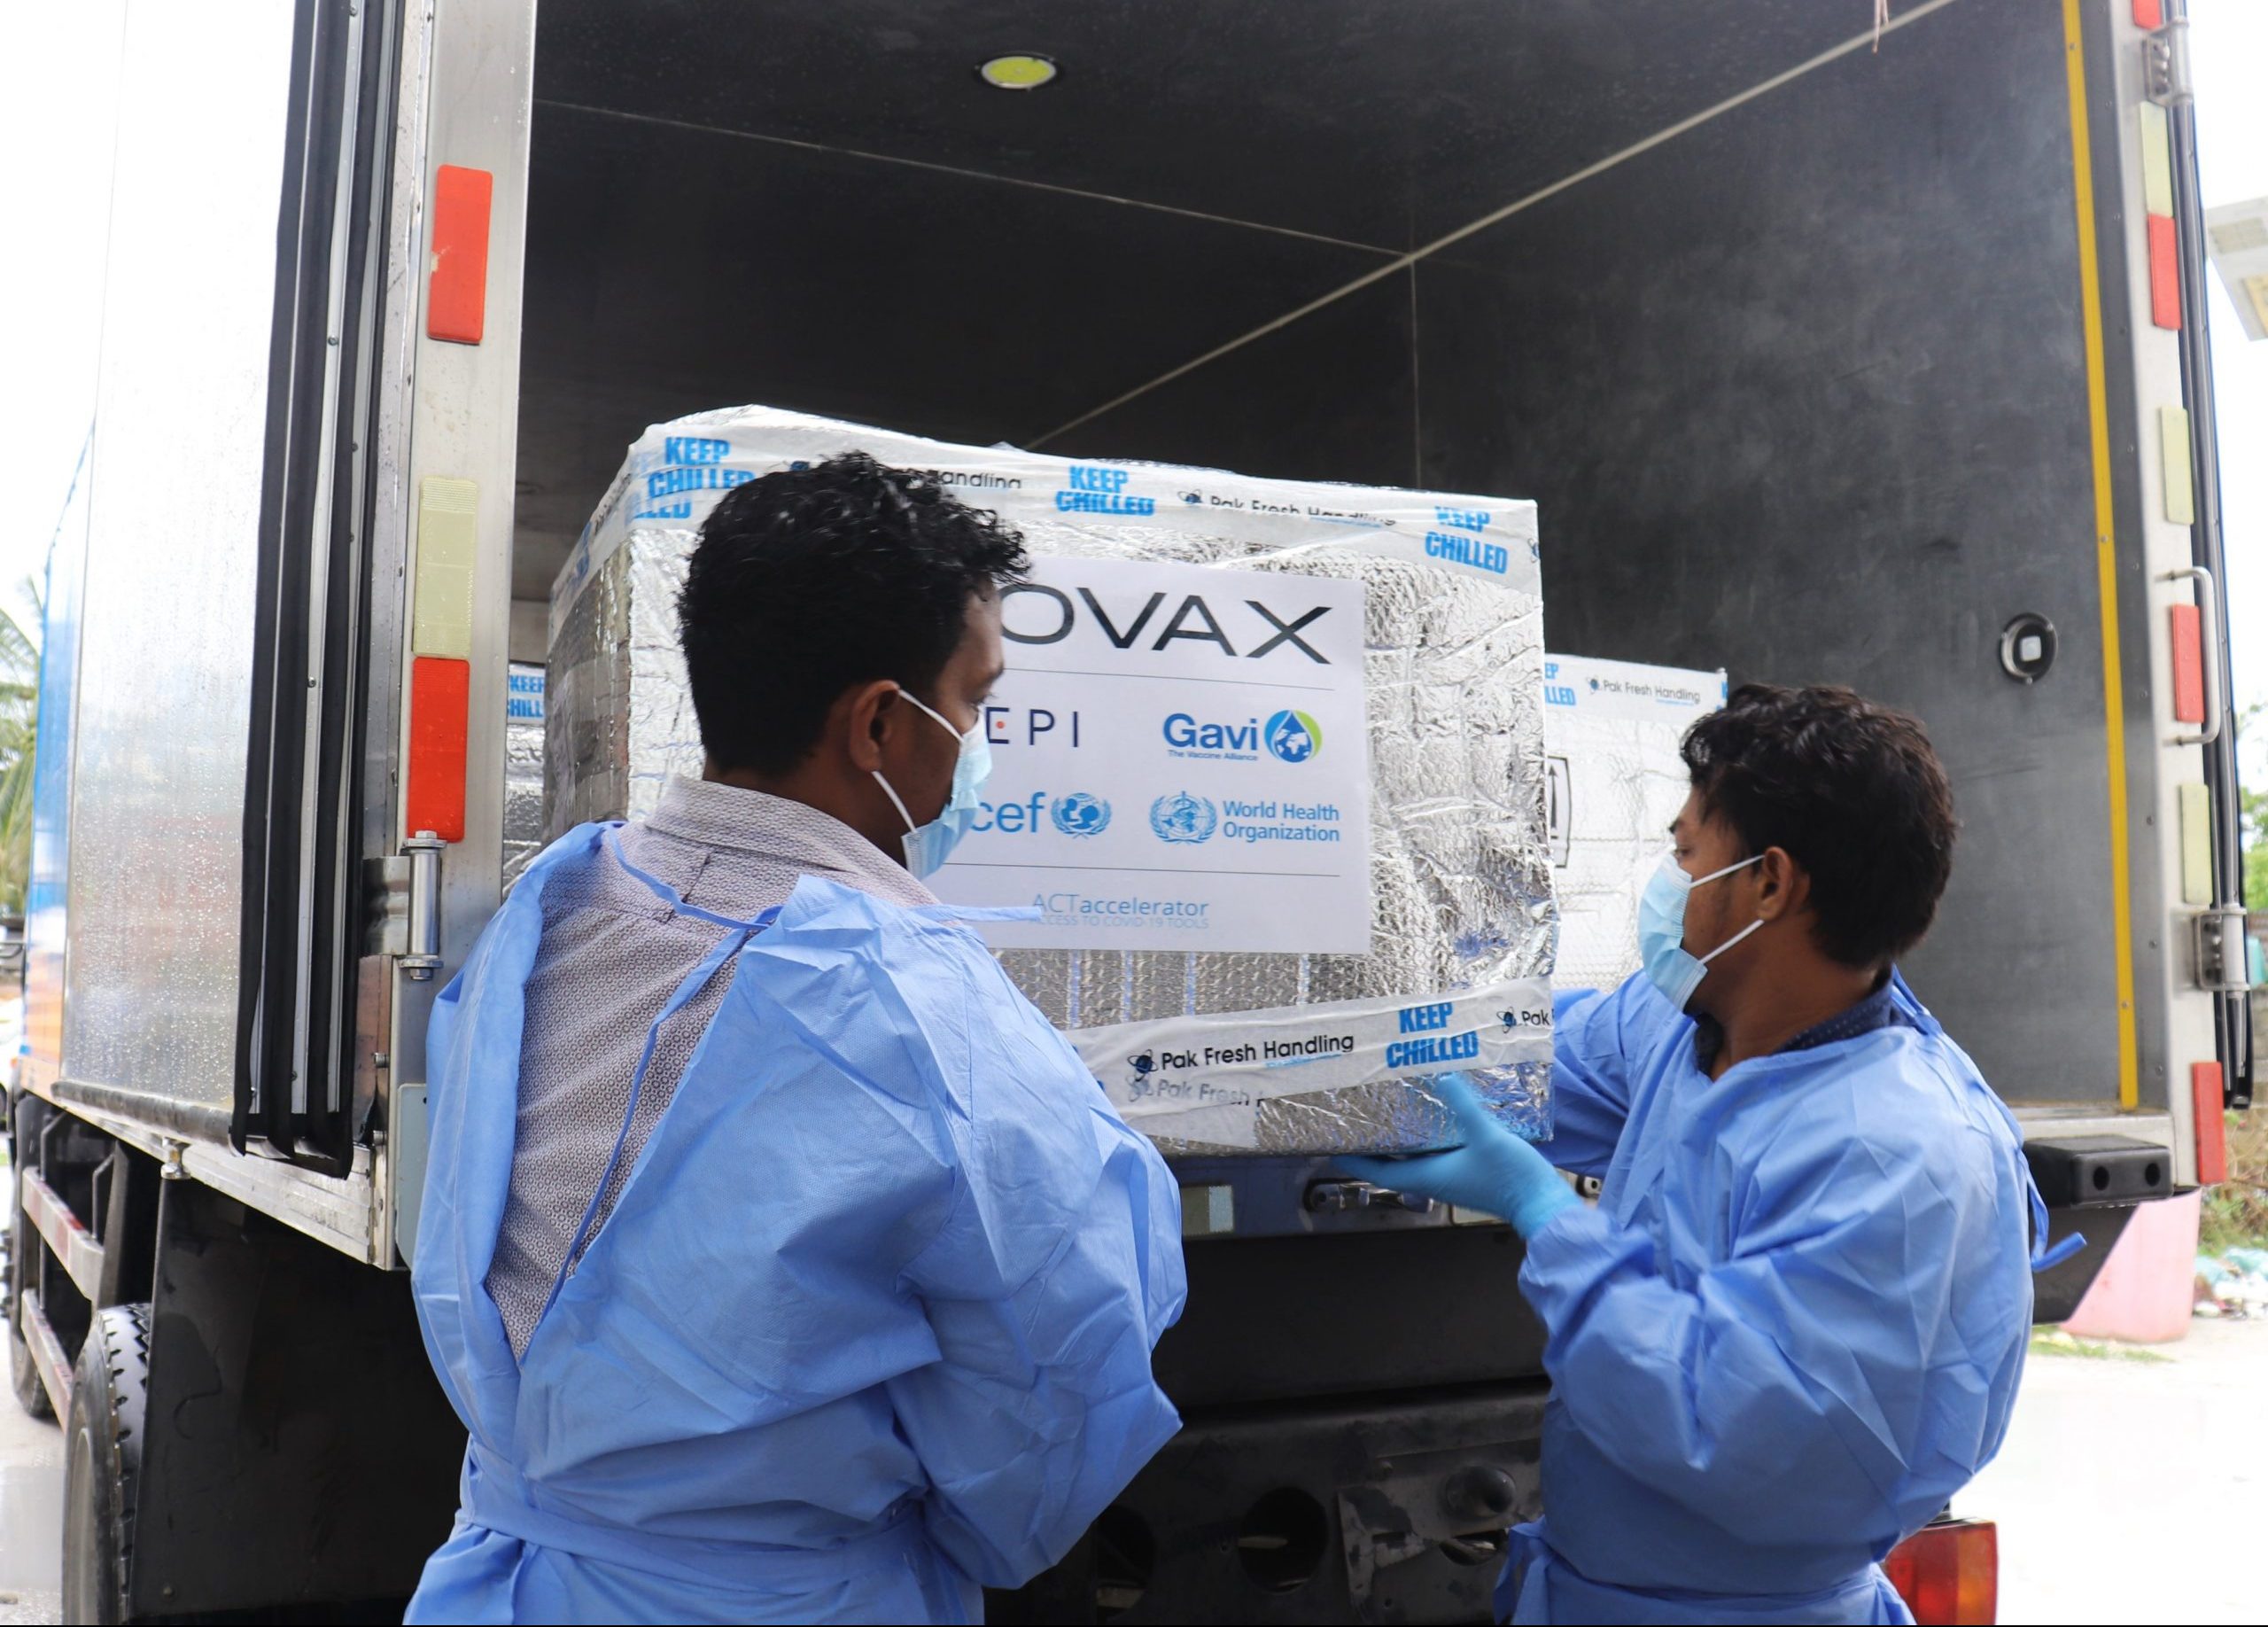 COVAX Summit: time for Australia to recommit to global, not just regional, vaccine equity